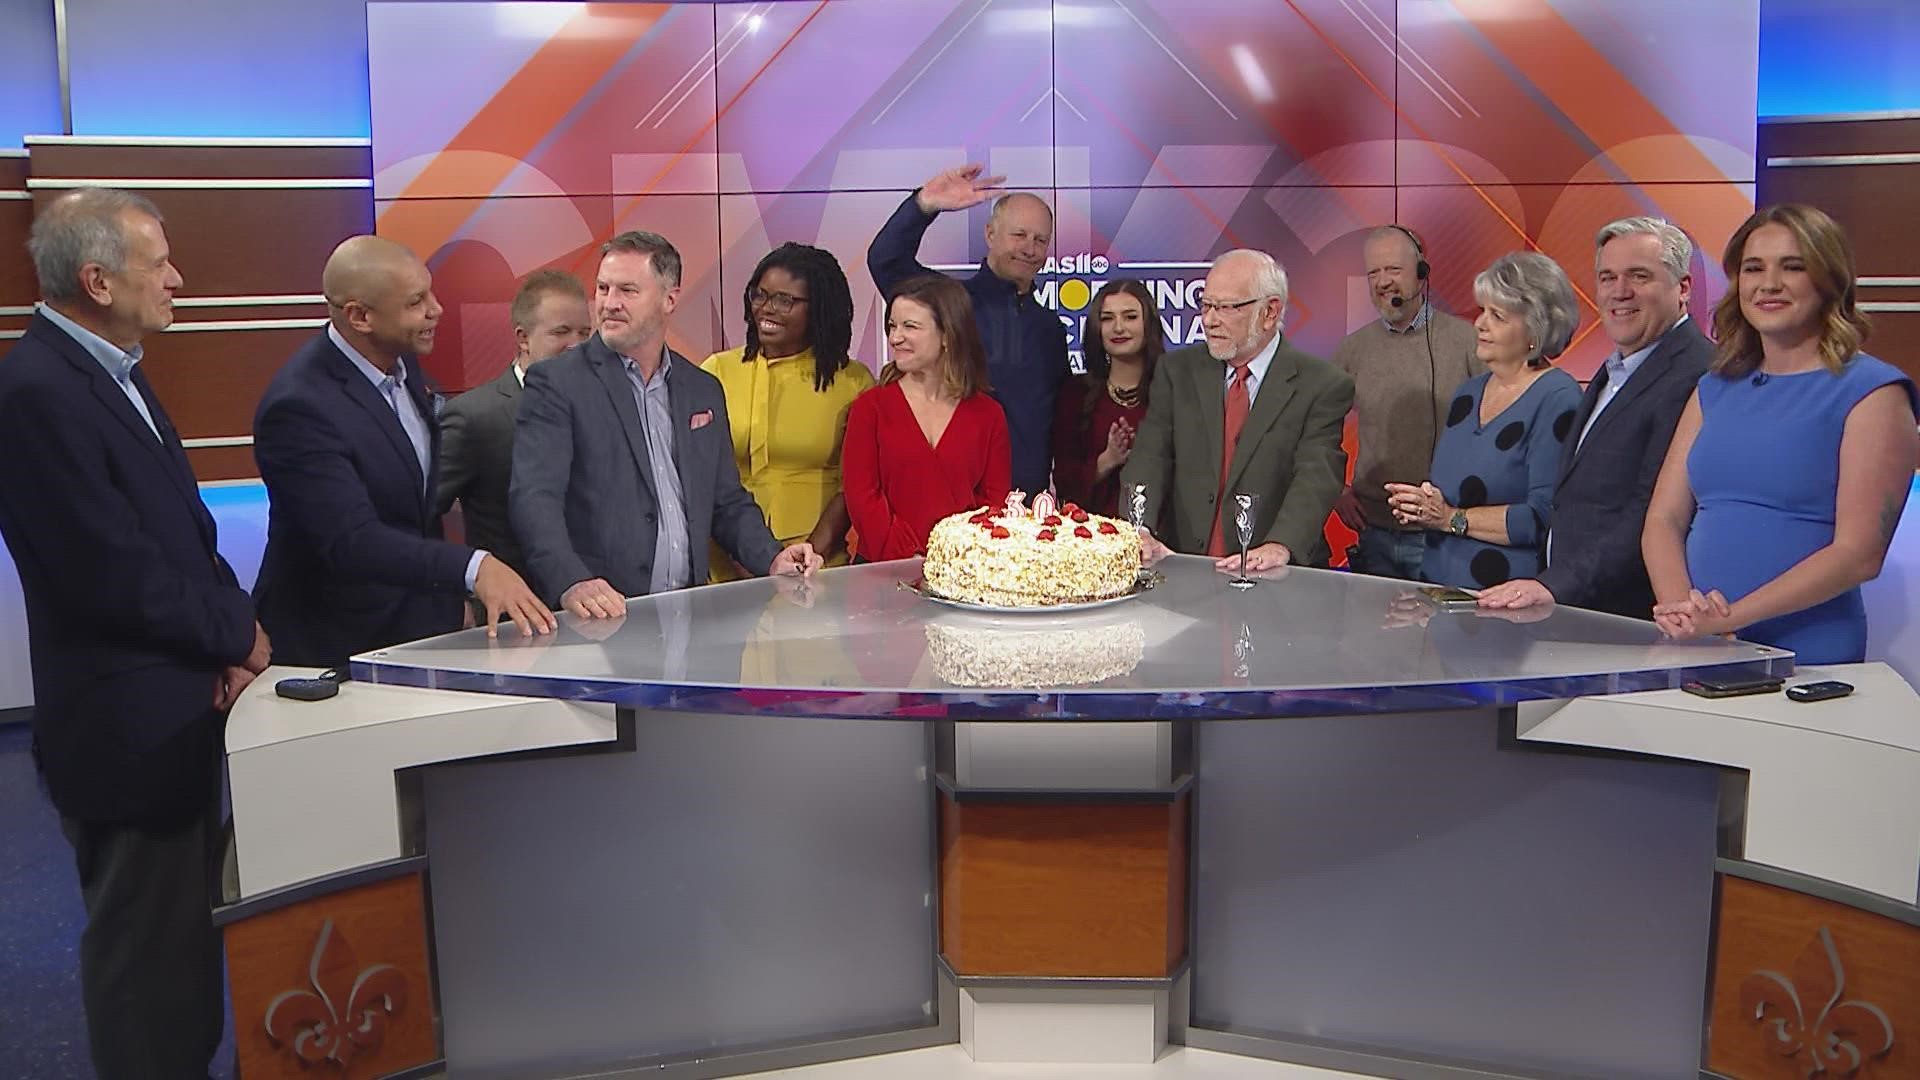 WHAS11 welcomed back several former anchors, reporters and meteorologists for GMK's birthday celebration.